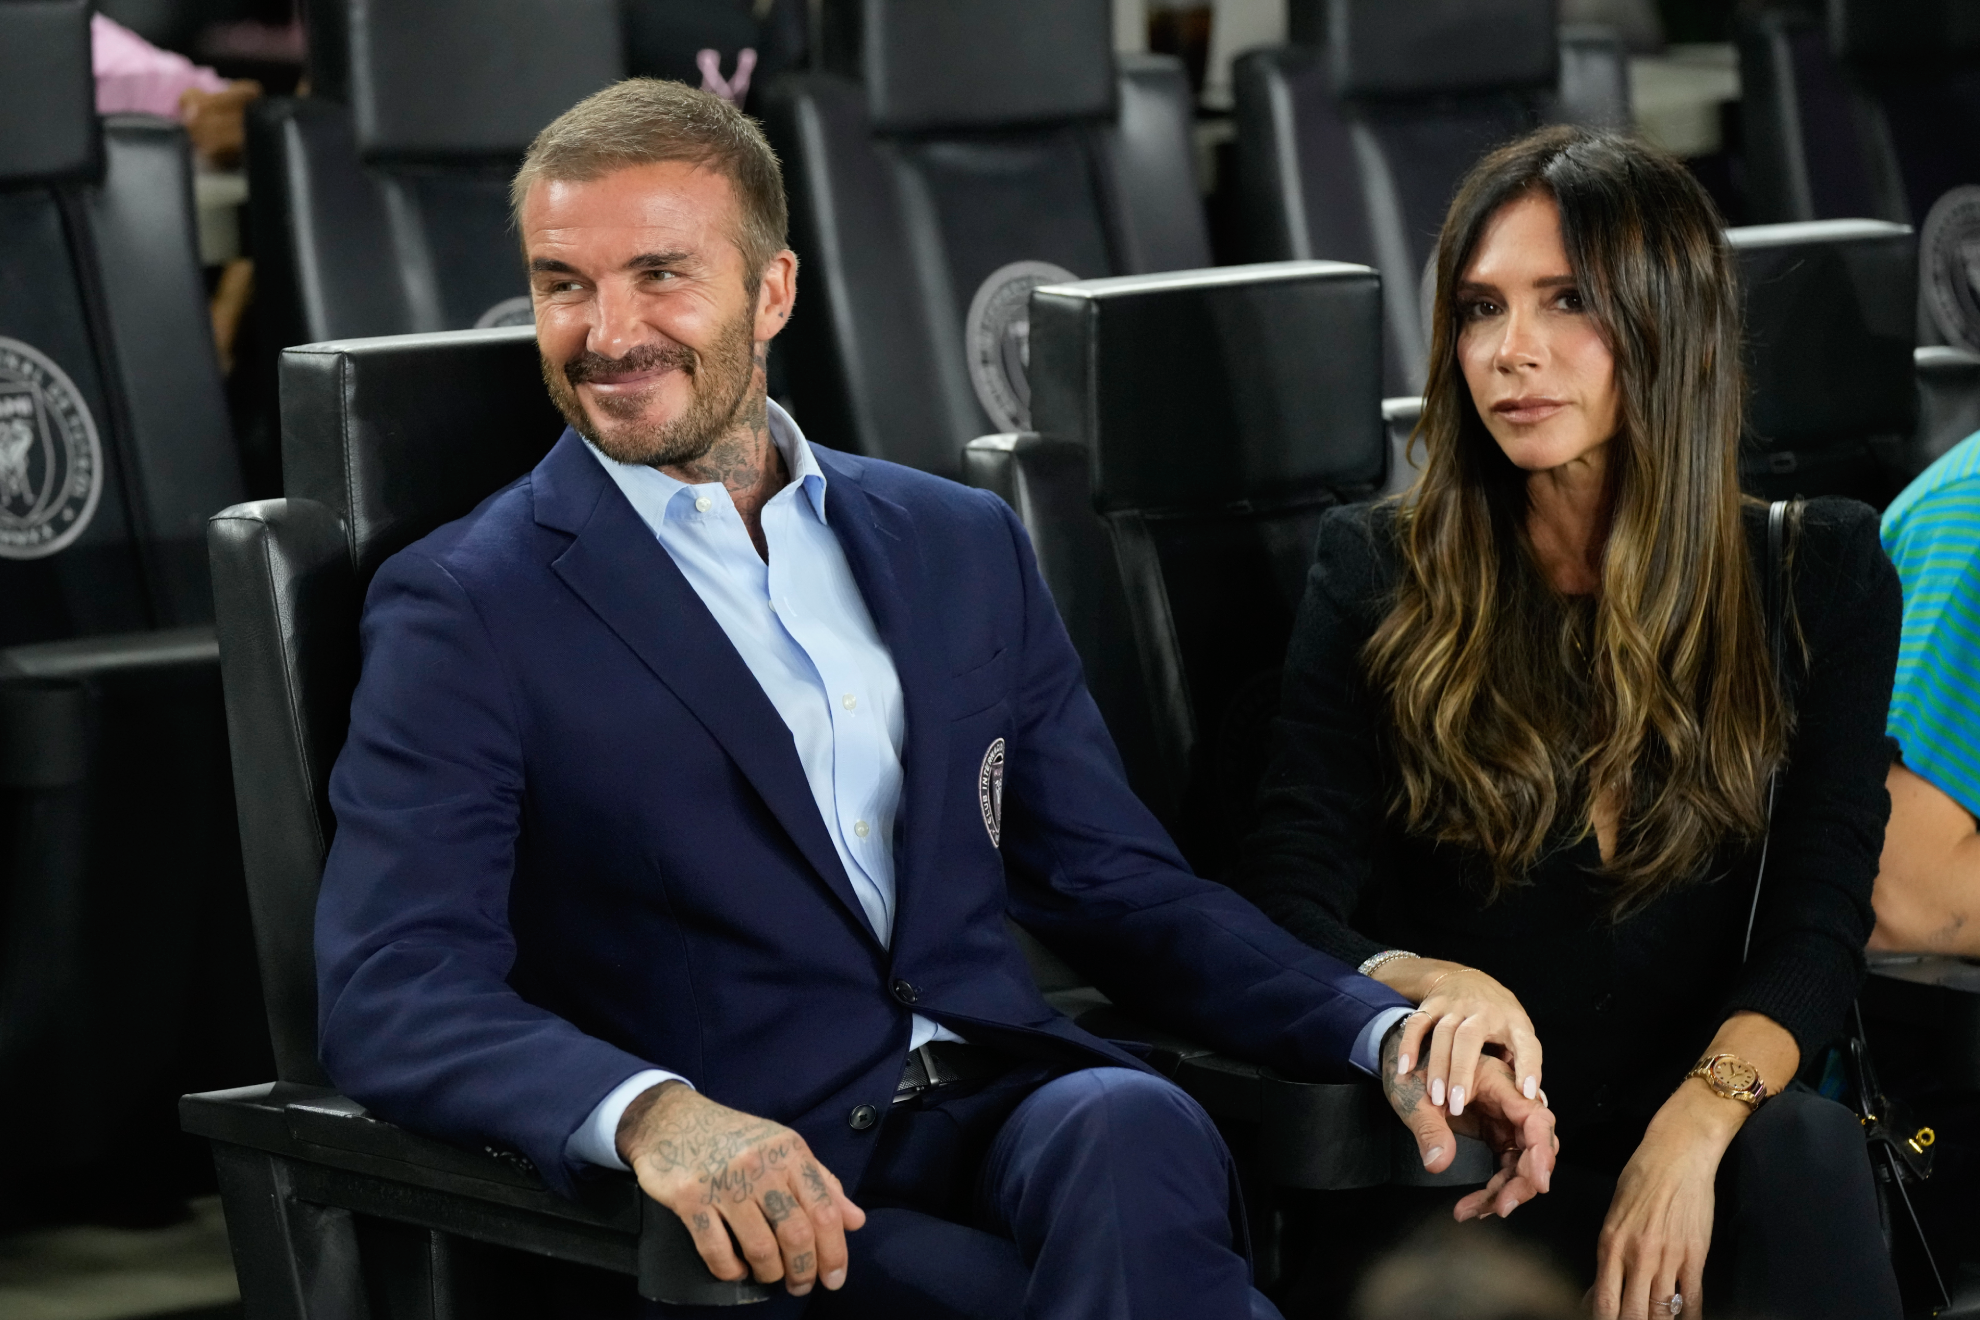 David Beckham's 'erotic' morning workout excites fans: 'This account is better than OnlyFans'